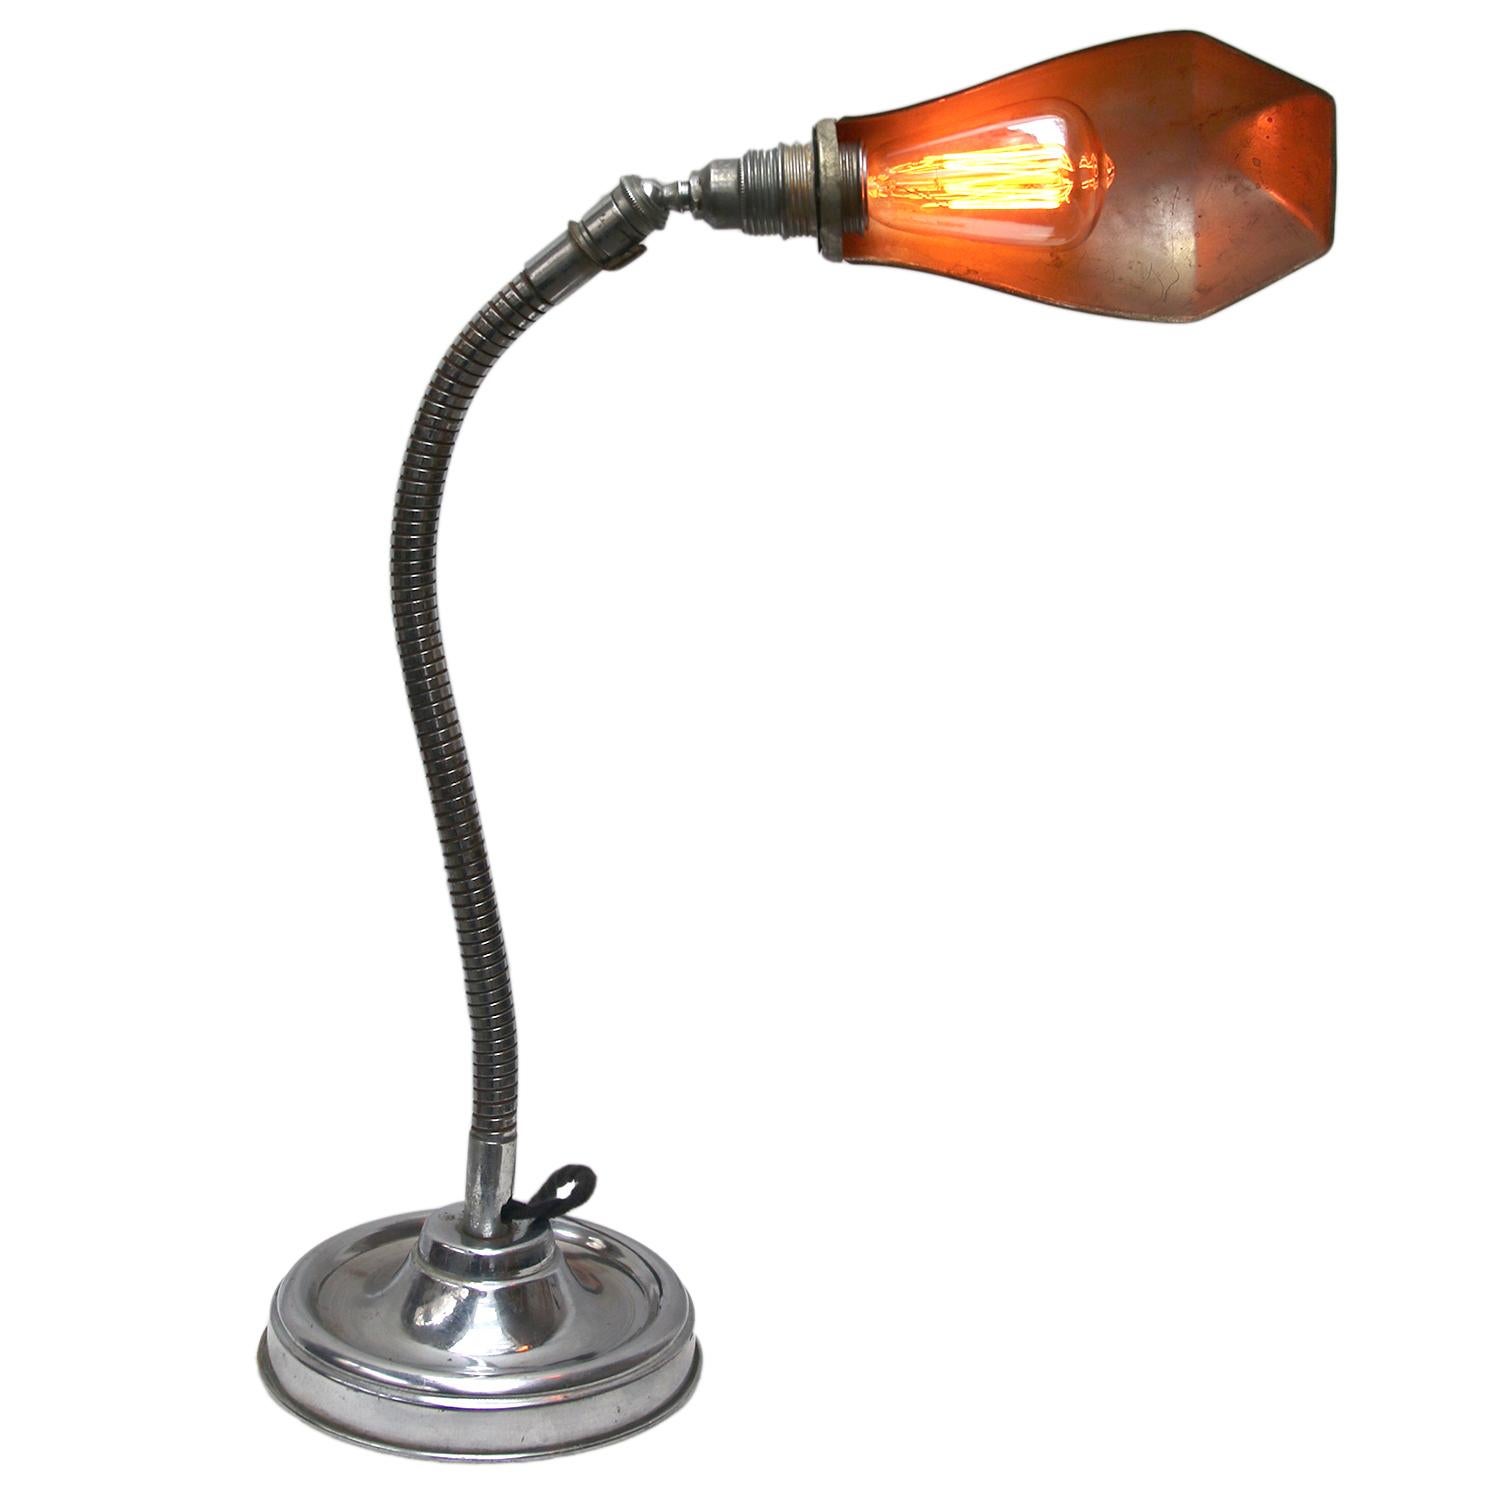 Silver French goose neck desk light.
Flexible arm with metal shade.
Cast iron base. Black cotton wire and plug.

Weight: 1.97 kg / 4.3 lb

Priced per individual item. All lamps have been made suitable by international standards for